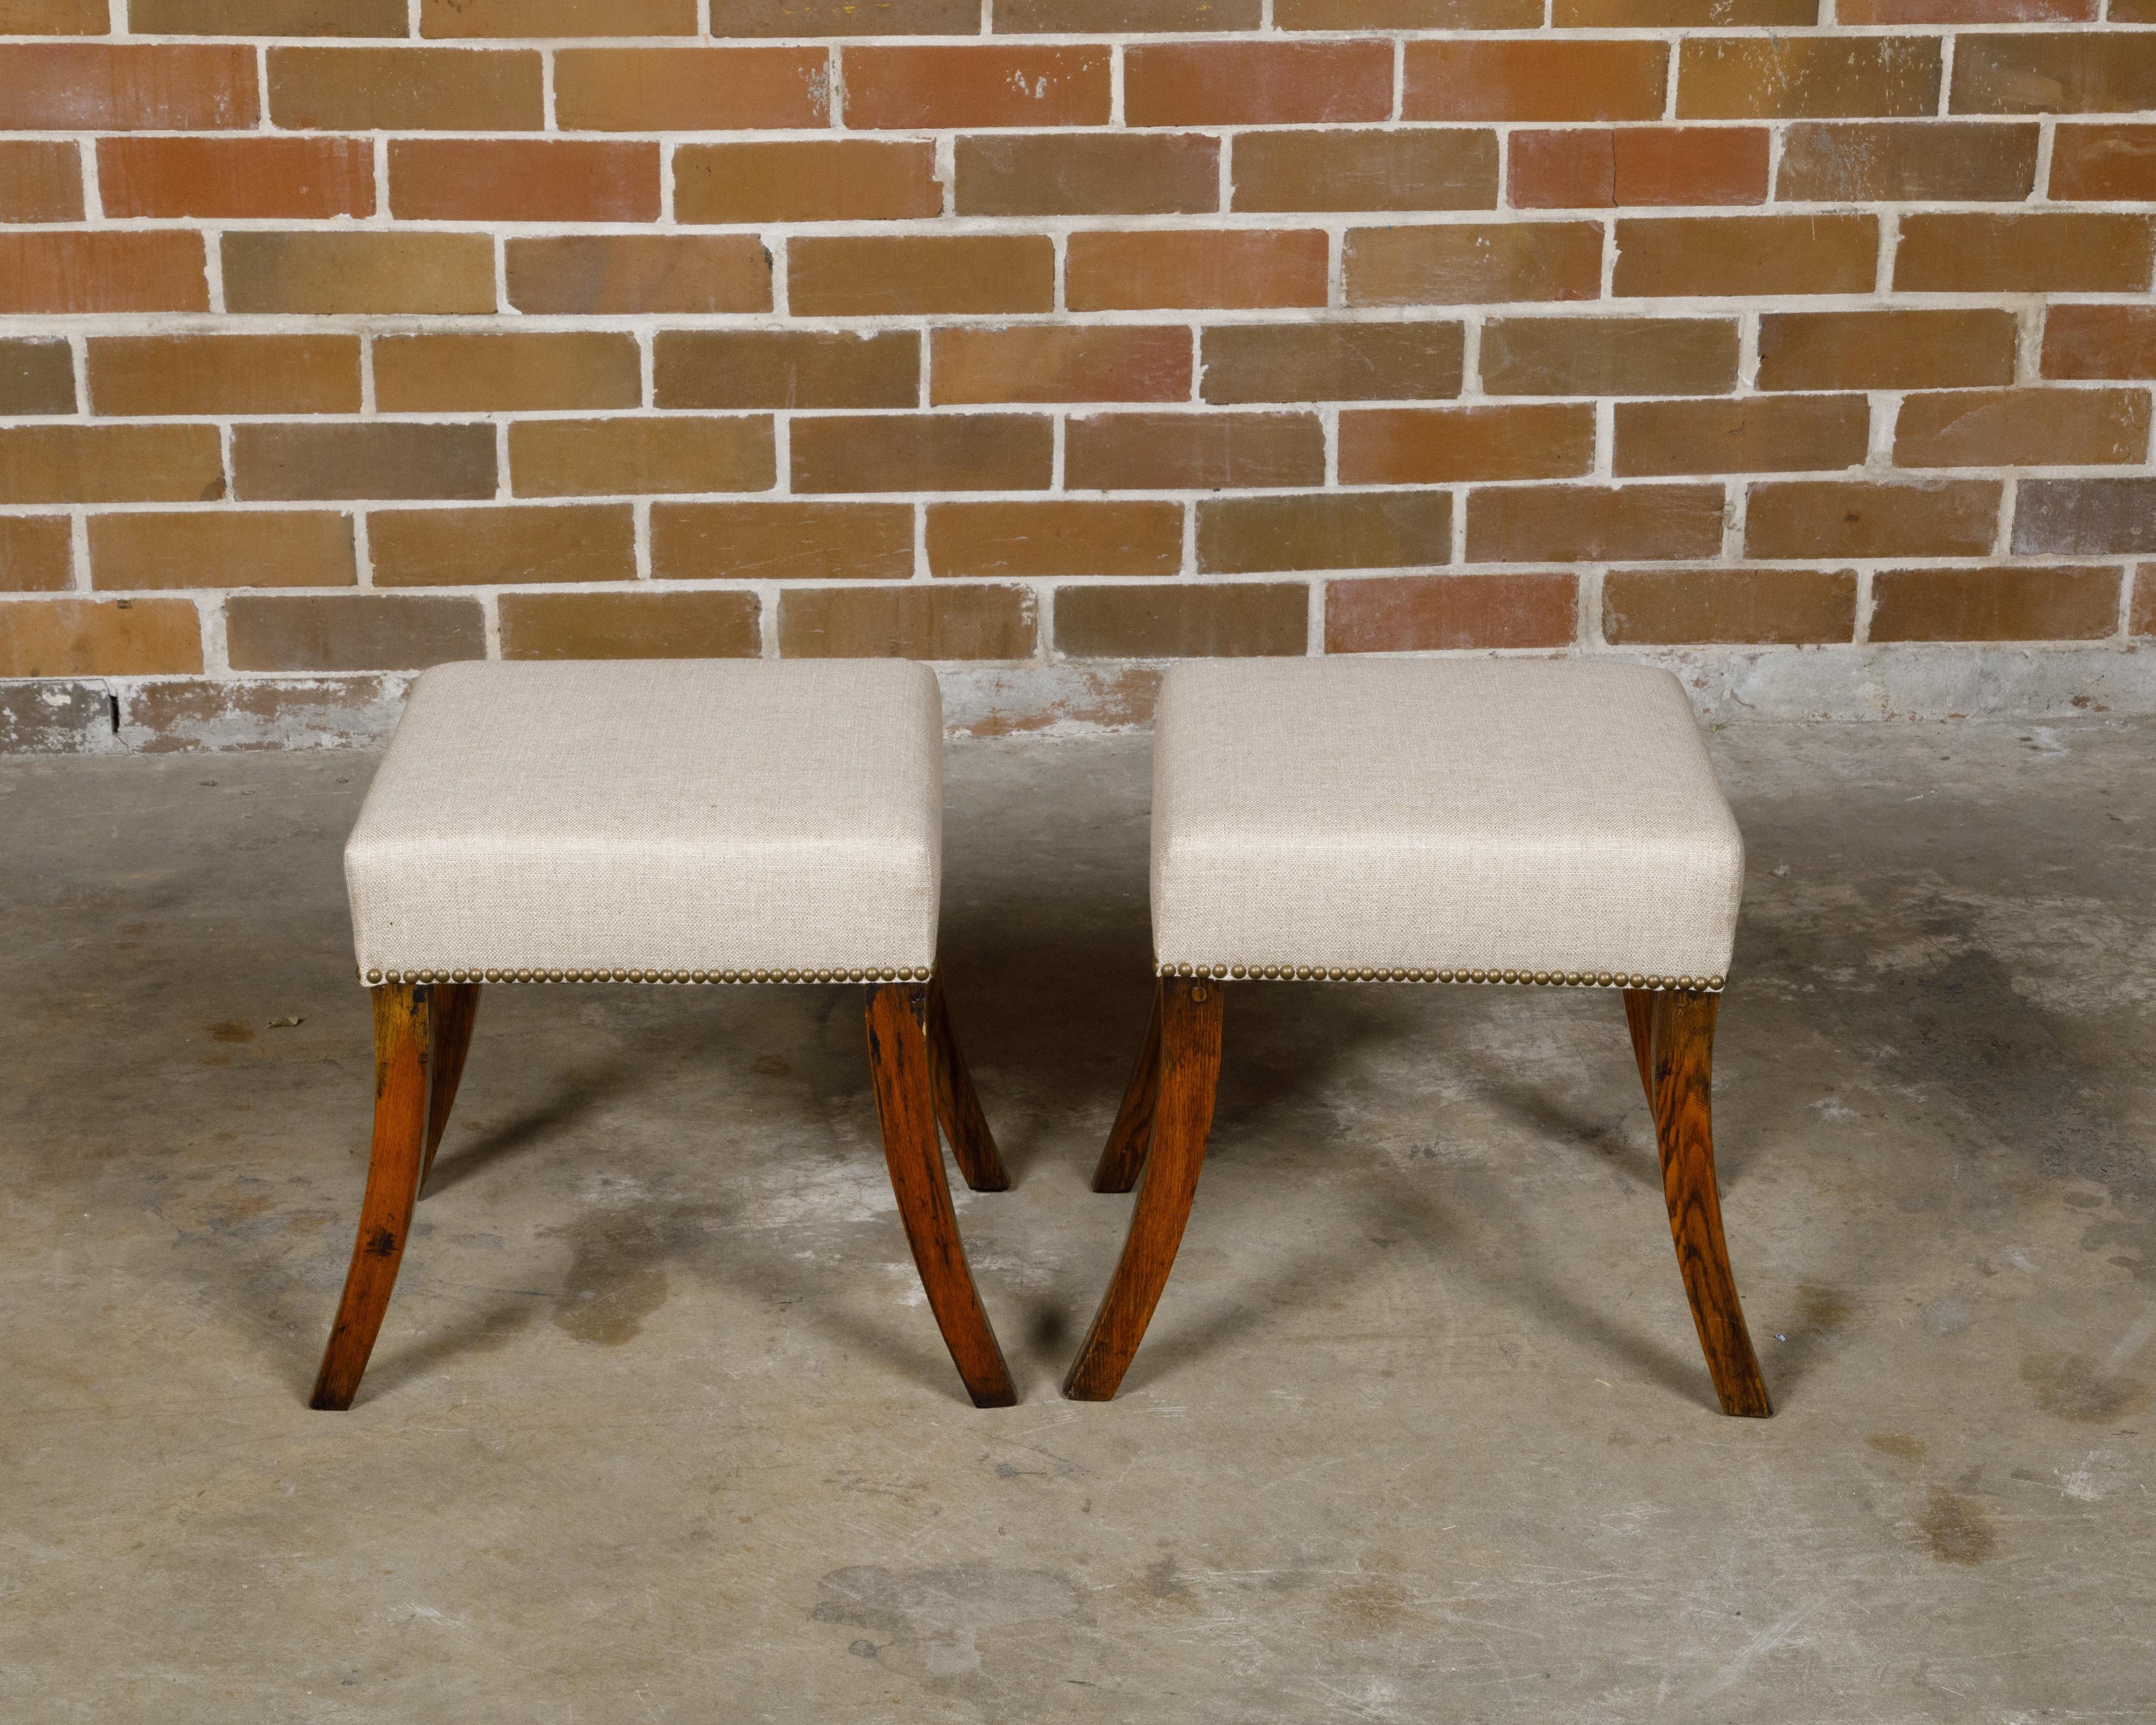 A pair of English oak stools from the 19th century with saber legs and custom upholstery. This pair of English oak stools from the 19th century is a splendid blend of traditional design and modern craftsmanship. Each stool stands on elegantly curved